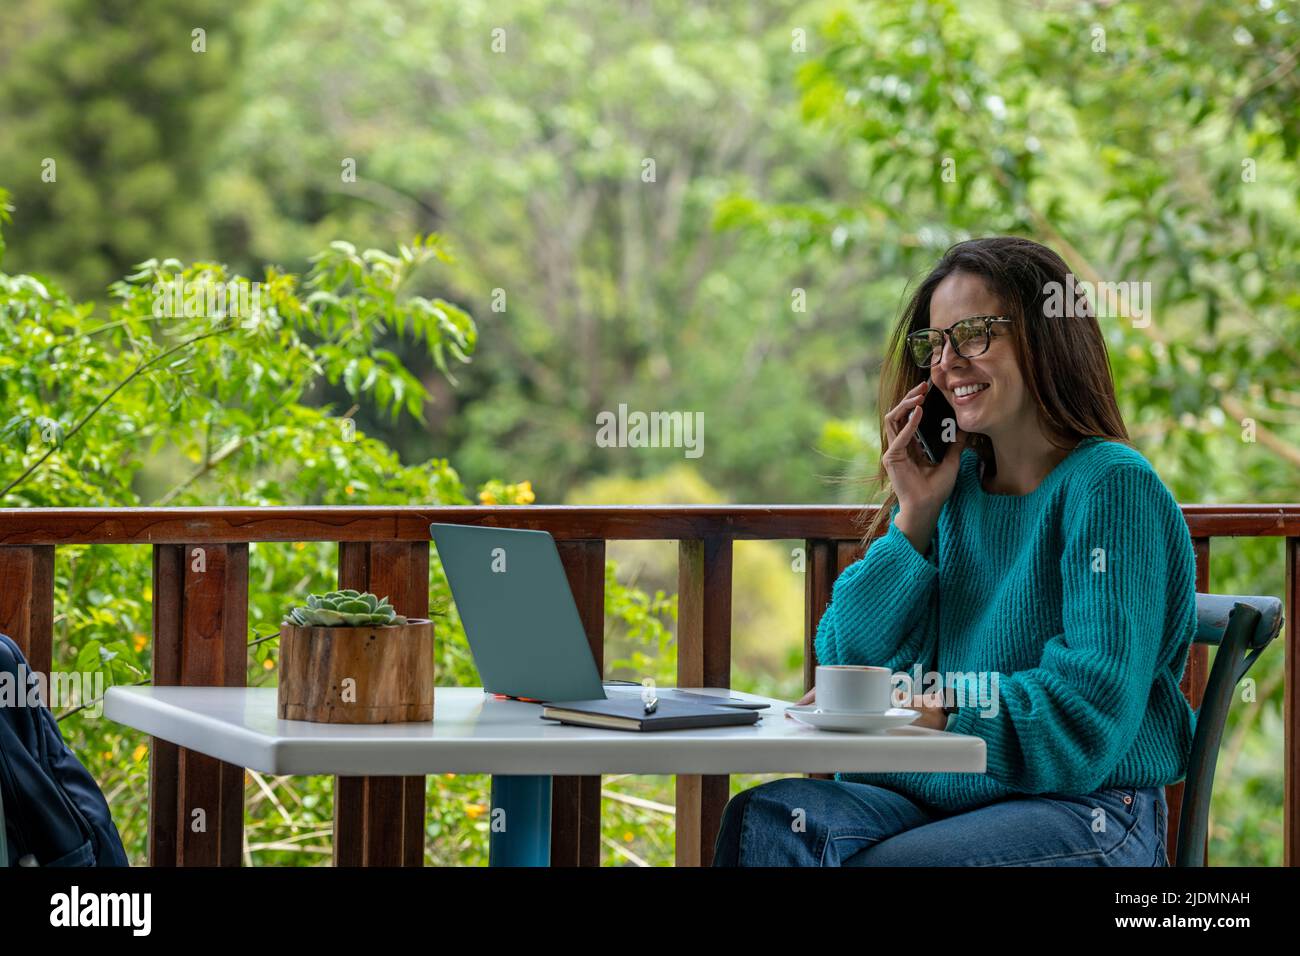 Young Latin American woman working on her laptop at a outdoor cafe while drinking a cup of coffee, Panama, Central America Stock Photo